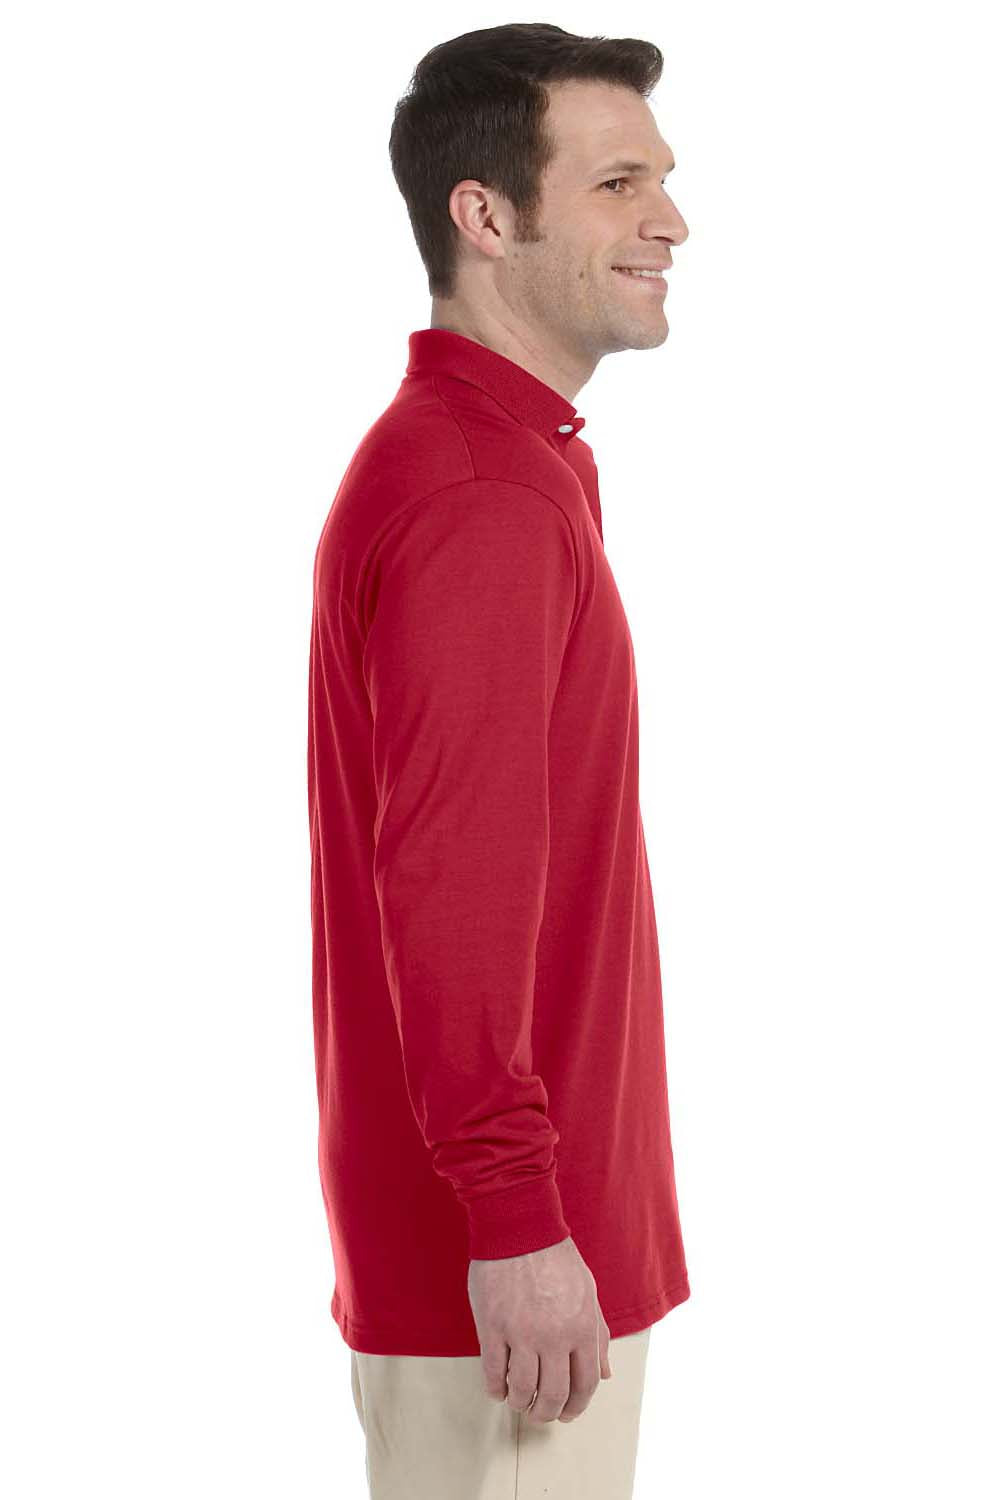 Jerzees 437ML Mens SpotShield Stain Resistant Long Sleeve Polo Shirt Red Side